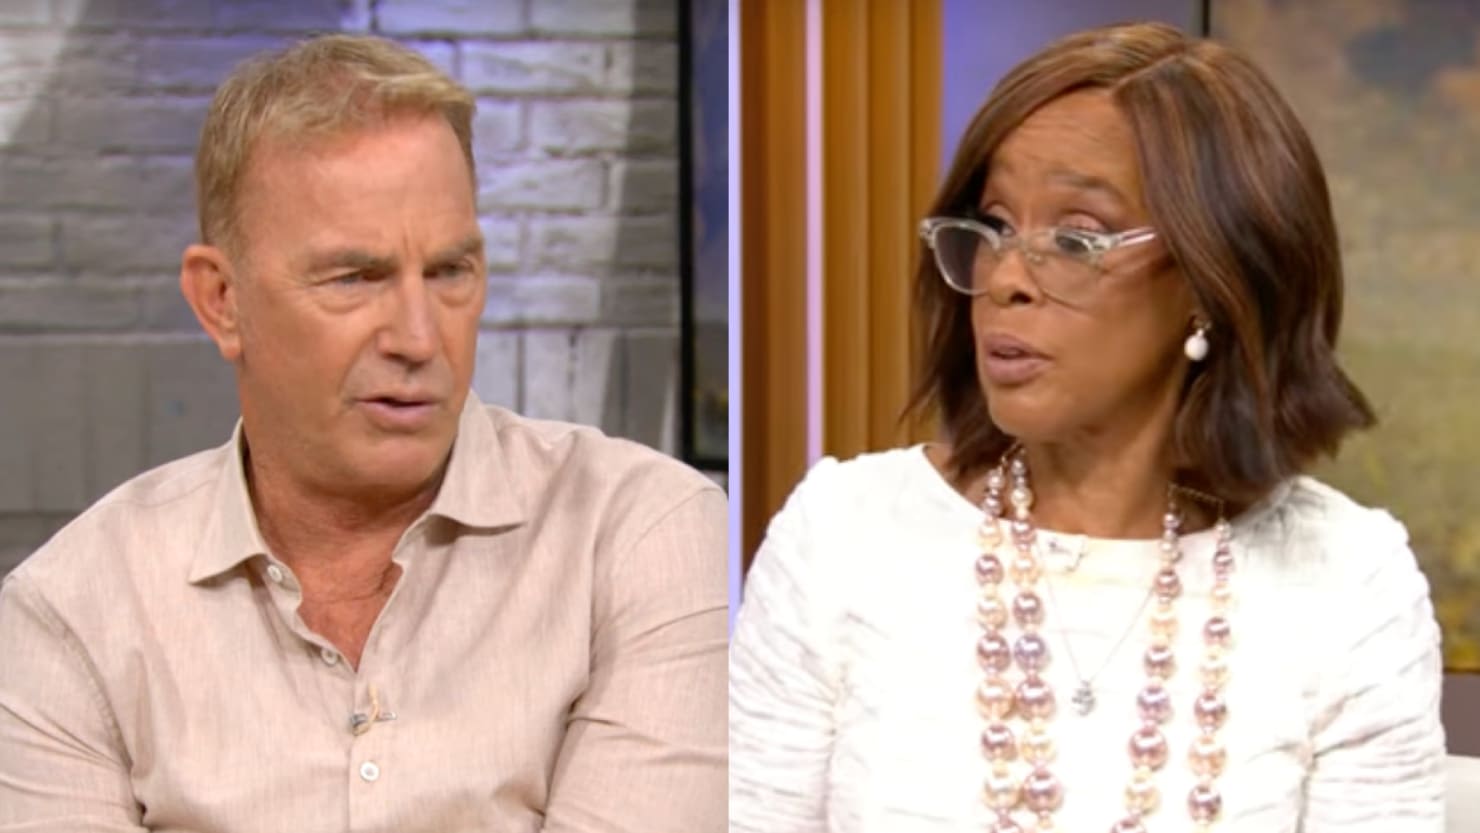 Kevin Costner Gets Testy With Gayle King Over ‘Yellowstone’ Drama